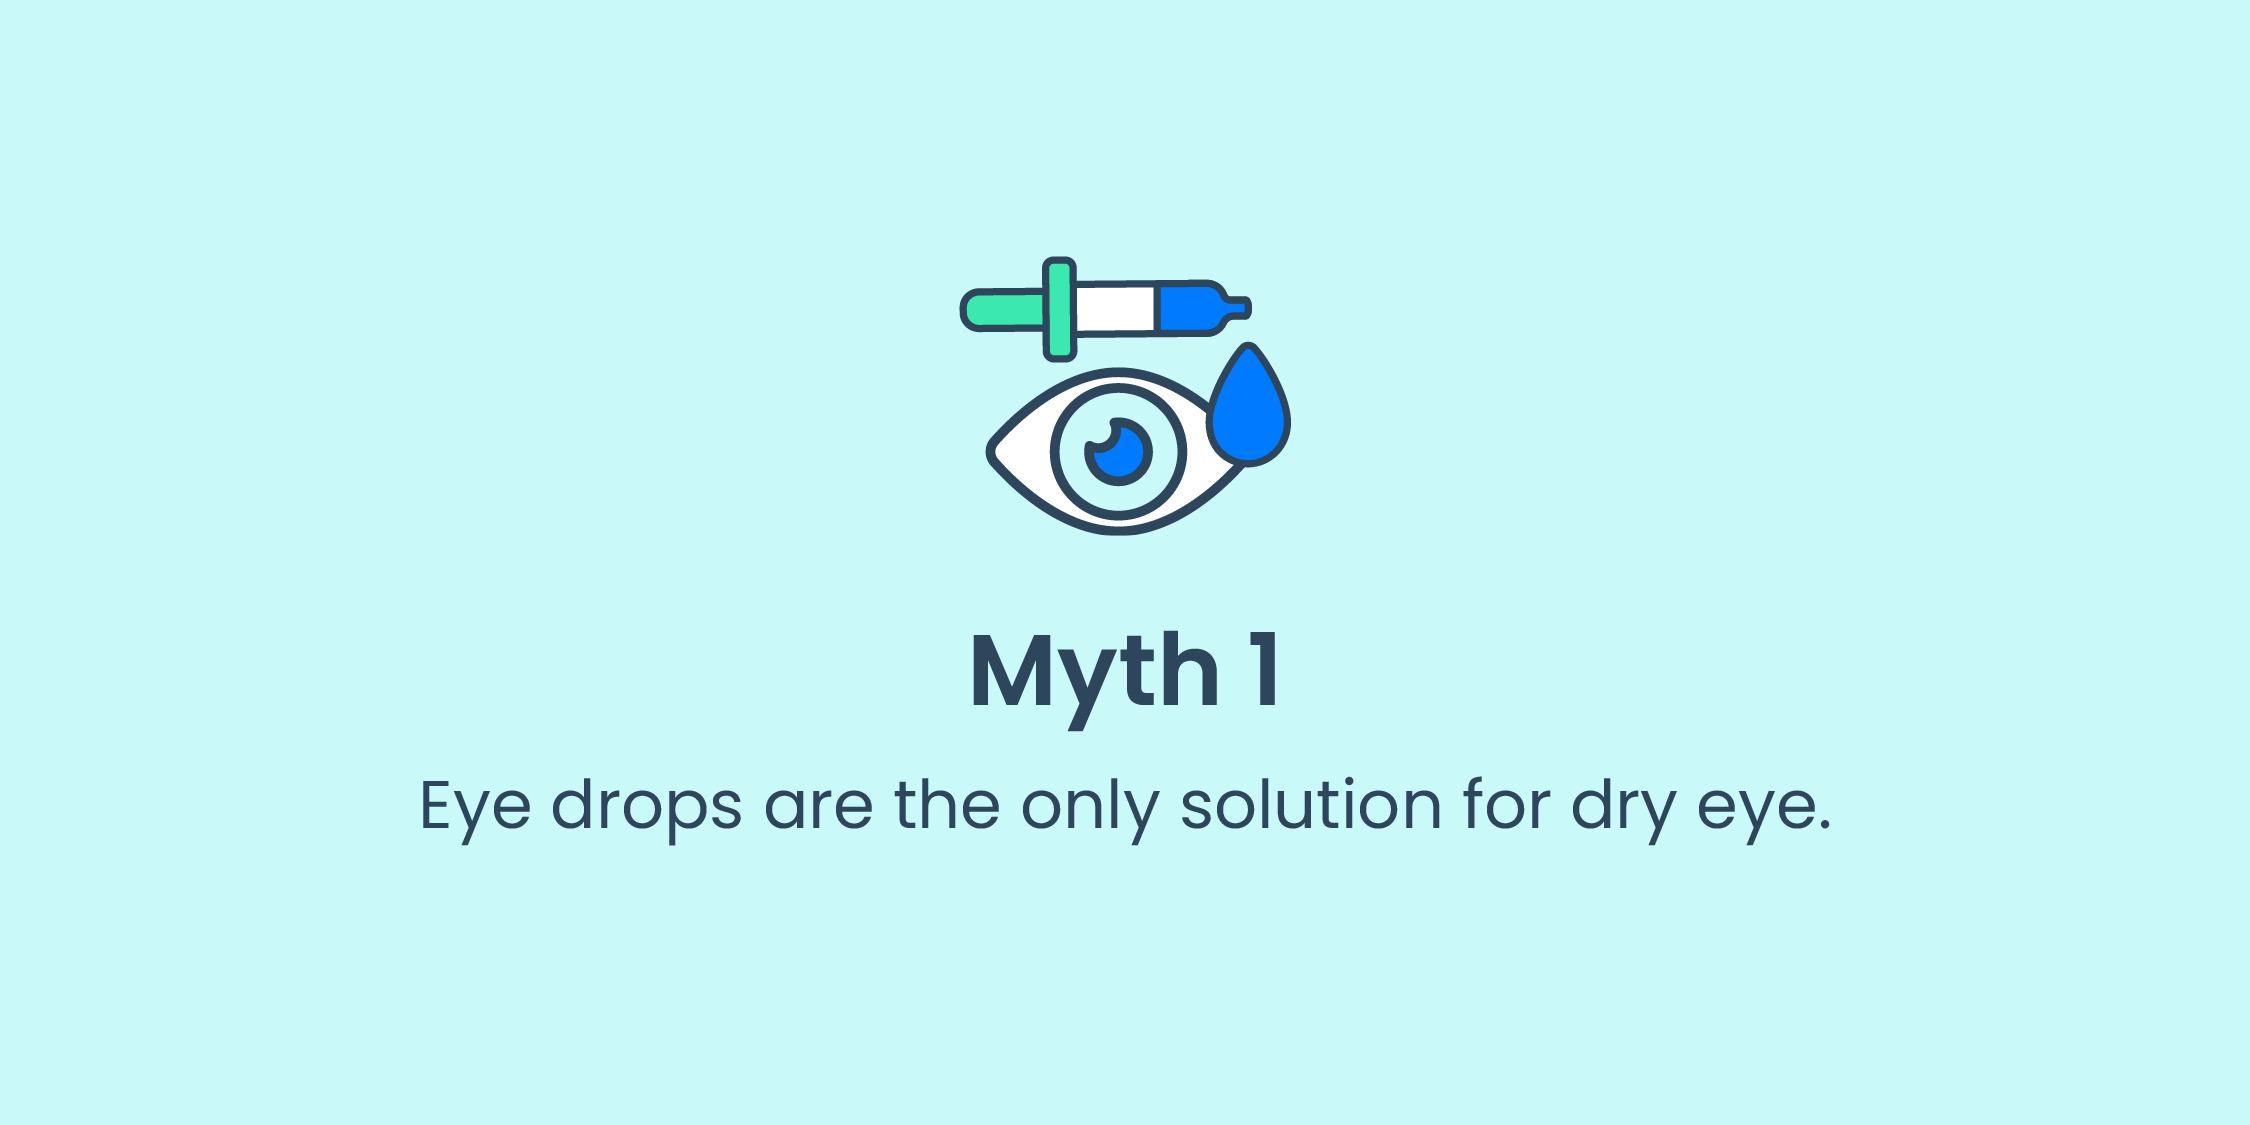 Myth #1: Eye drops are the only solution for dry eye.